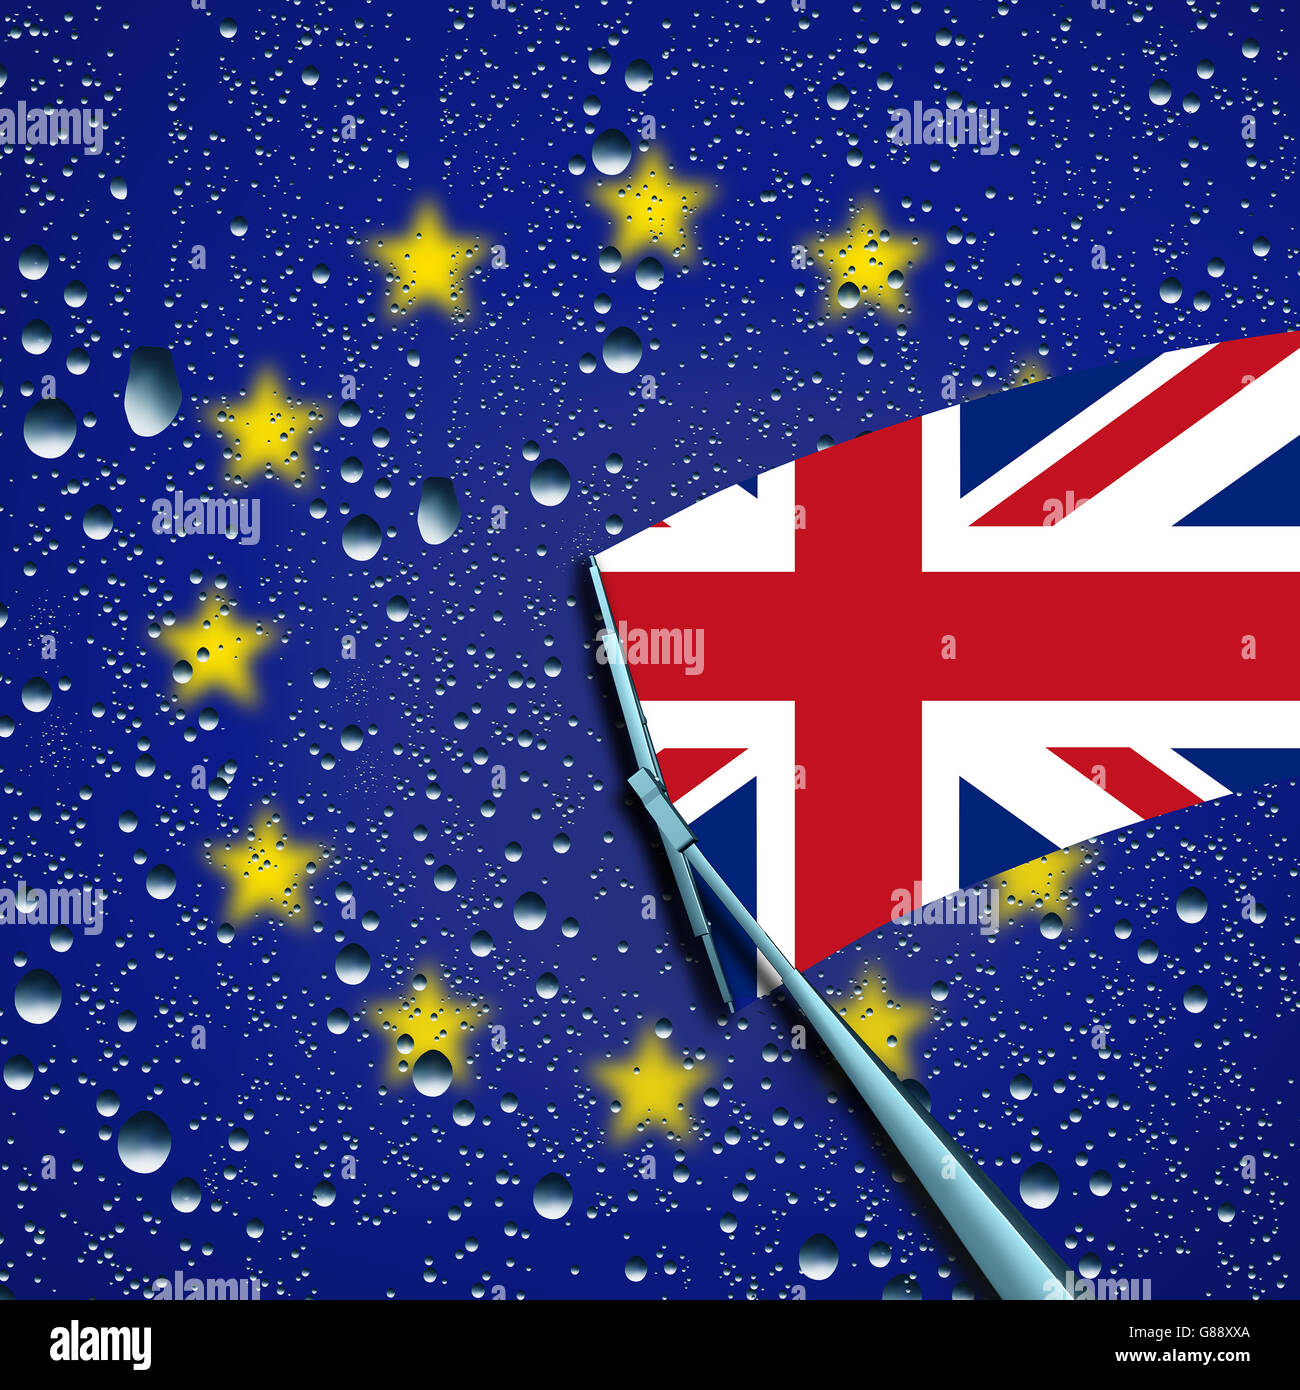 Britain leave or leaving European Union concept and decision as a brexit and UK independence vote or Euro zone crisis as a wiper washing away the Europe flag to expose the british flag as a 3D illustration. Stock Photo